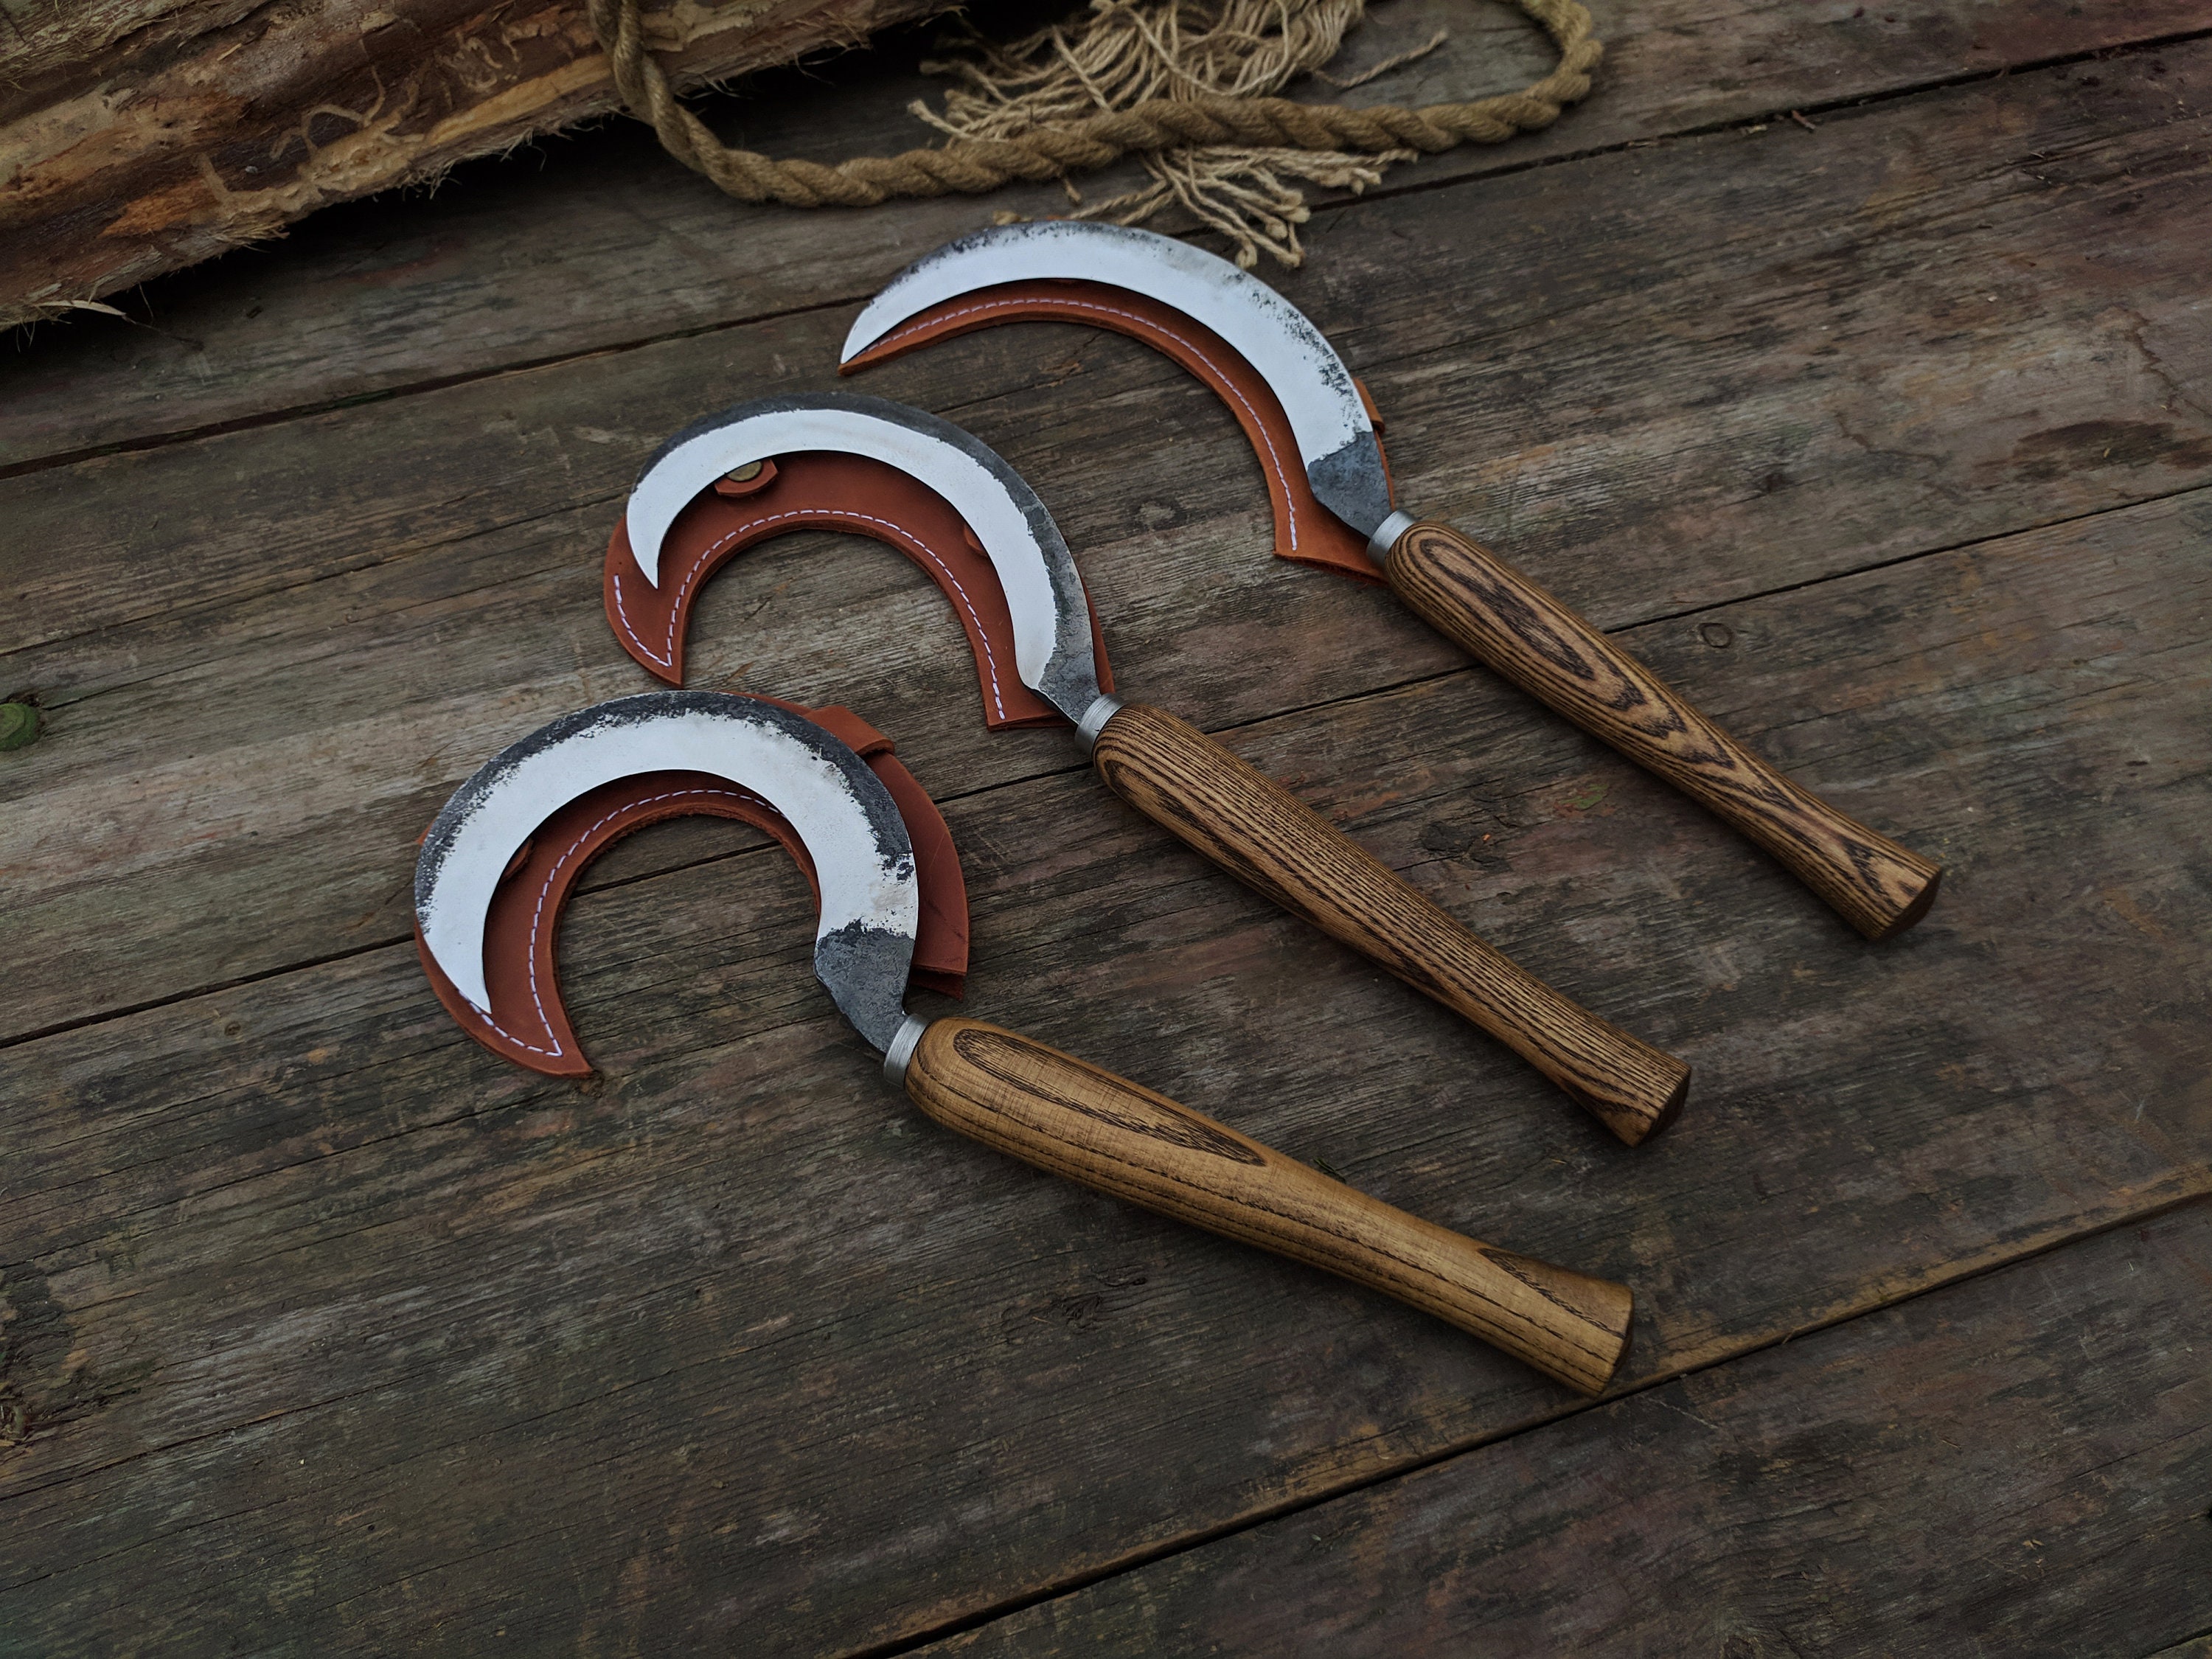 Handmade Forged Sickle Set 3pcs. the Tool for Herbalism. Forged Braid  Handmade for Collecting Herbs. Boline Ritual Sickle Hand Forged Boline 